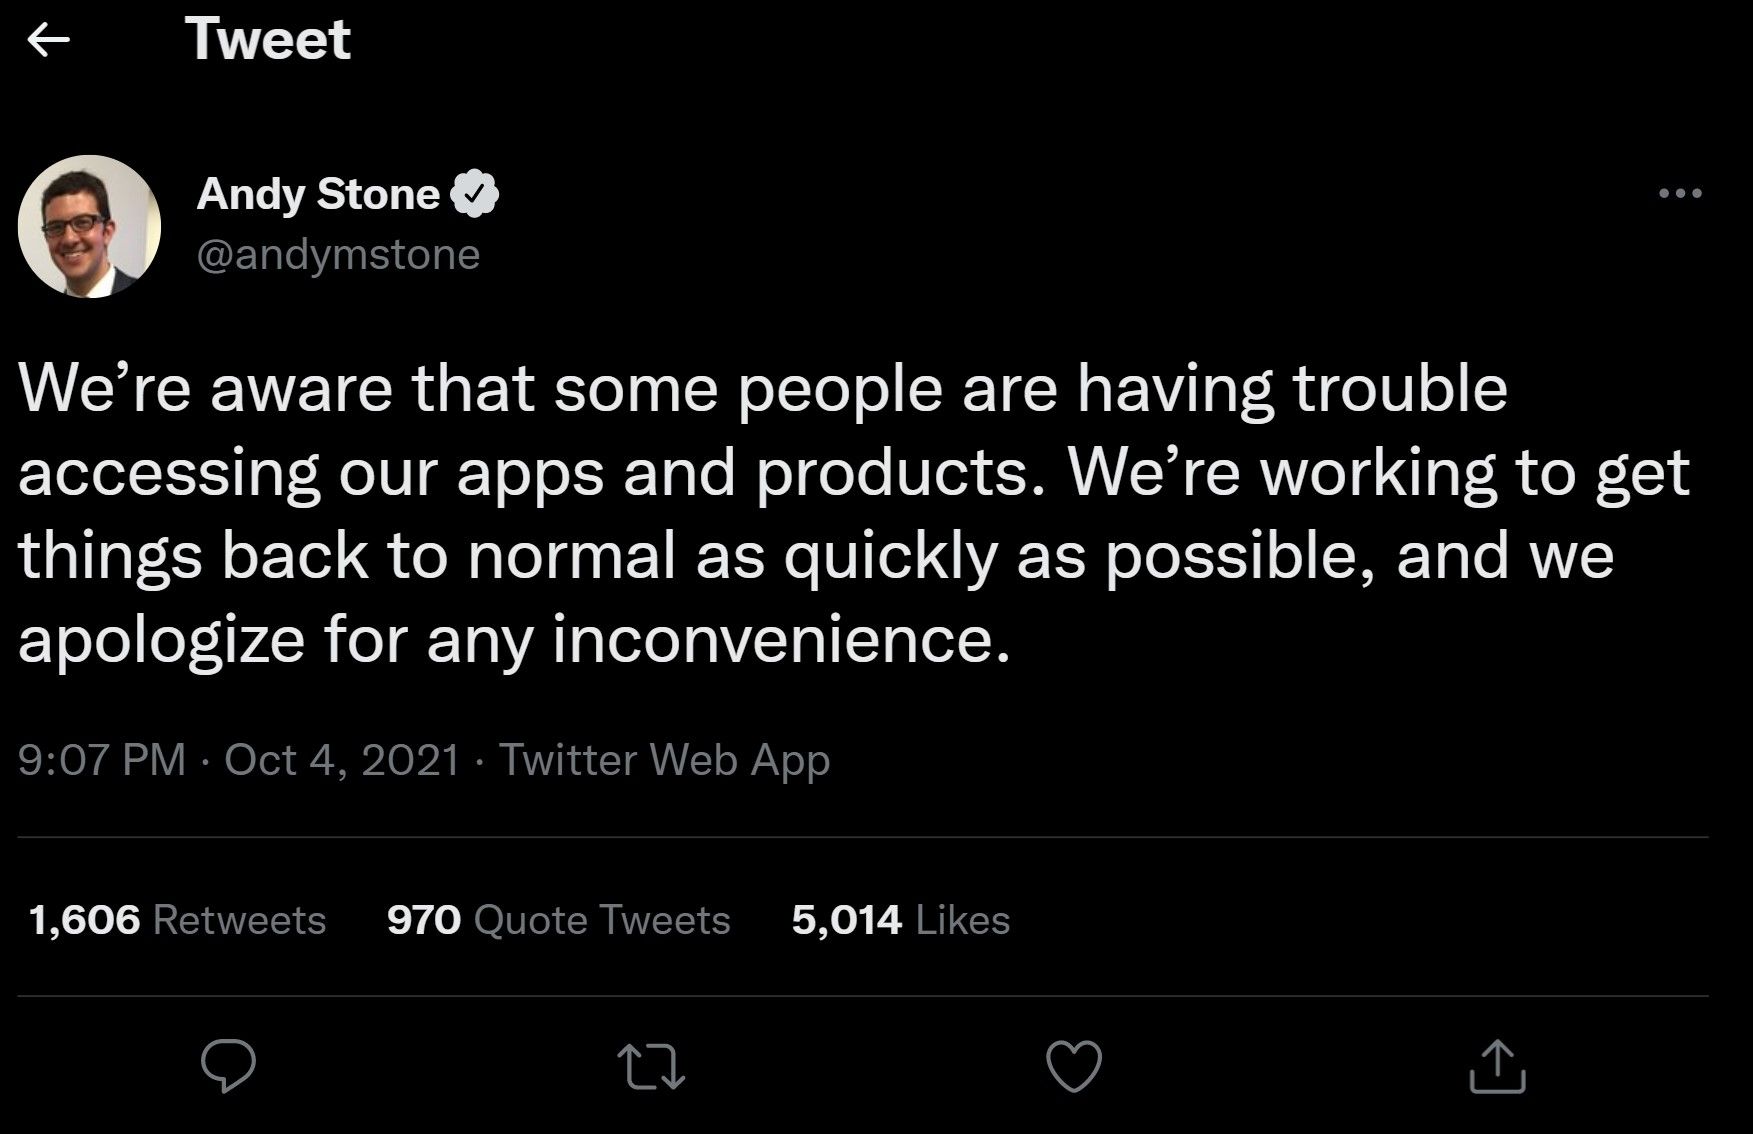 Tweet of Andy Stone About Facebook and Messenger Outages on Twitter